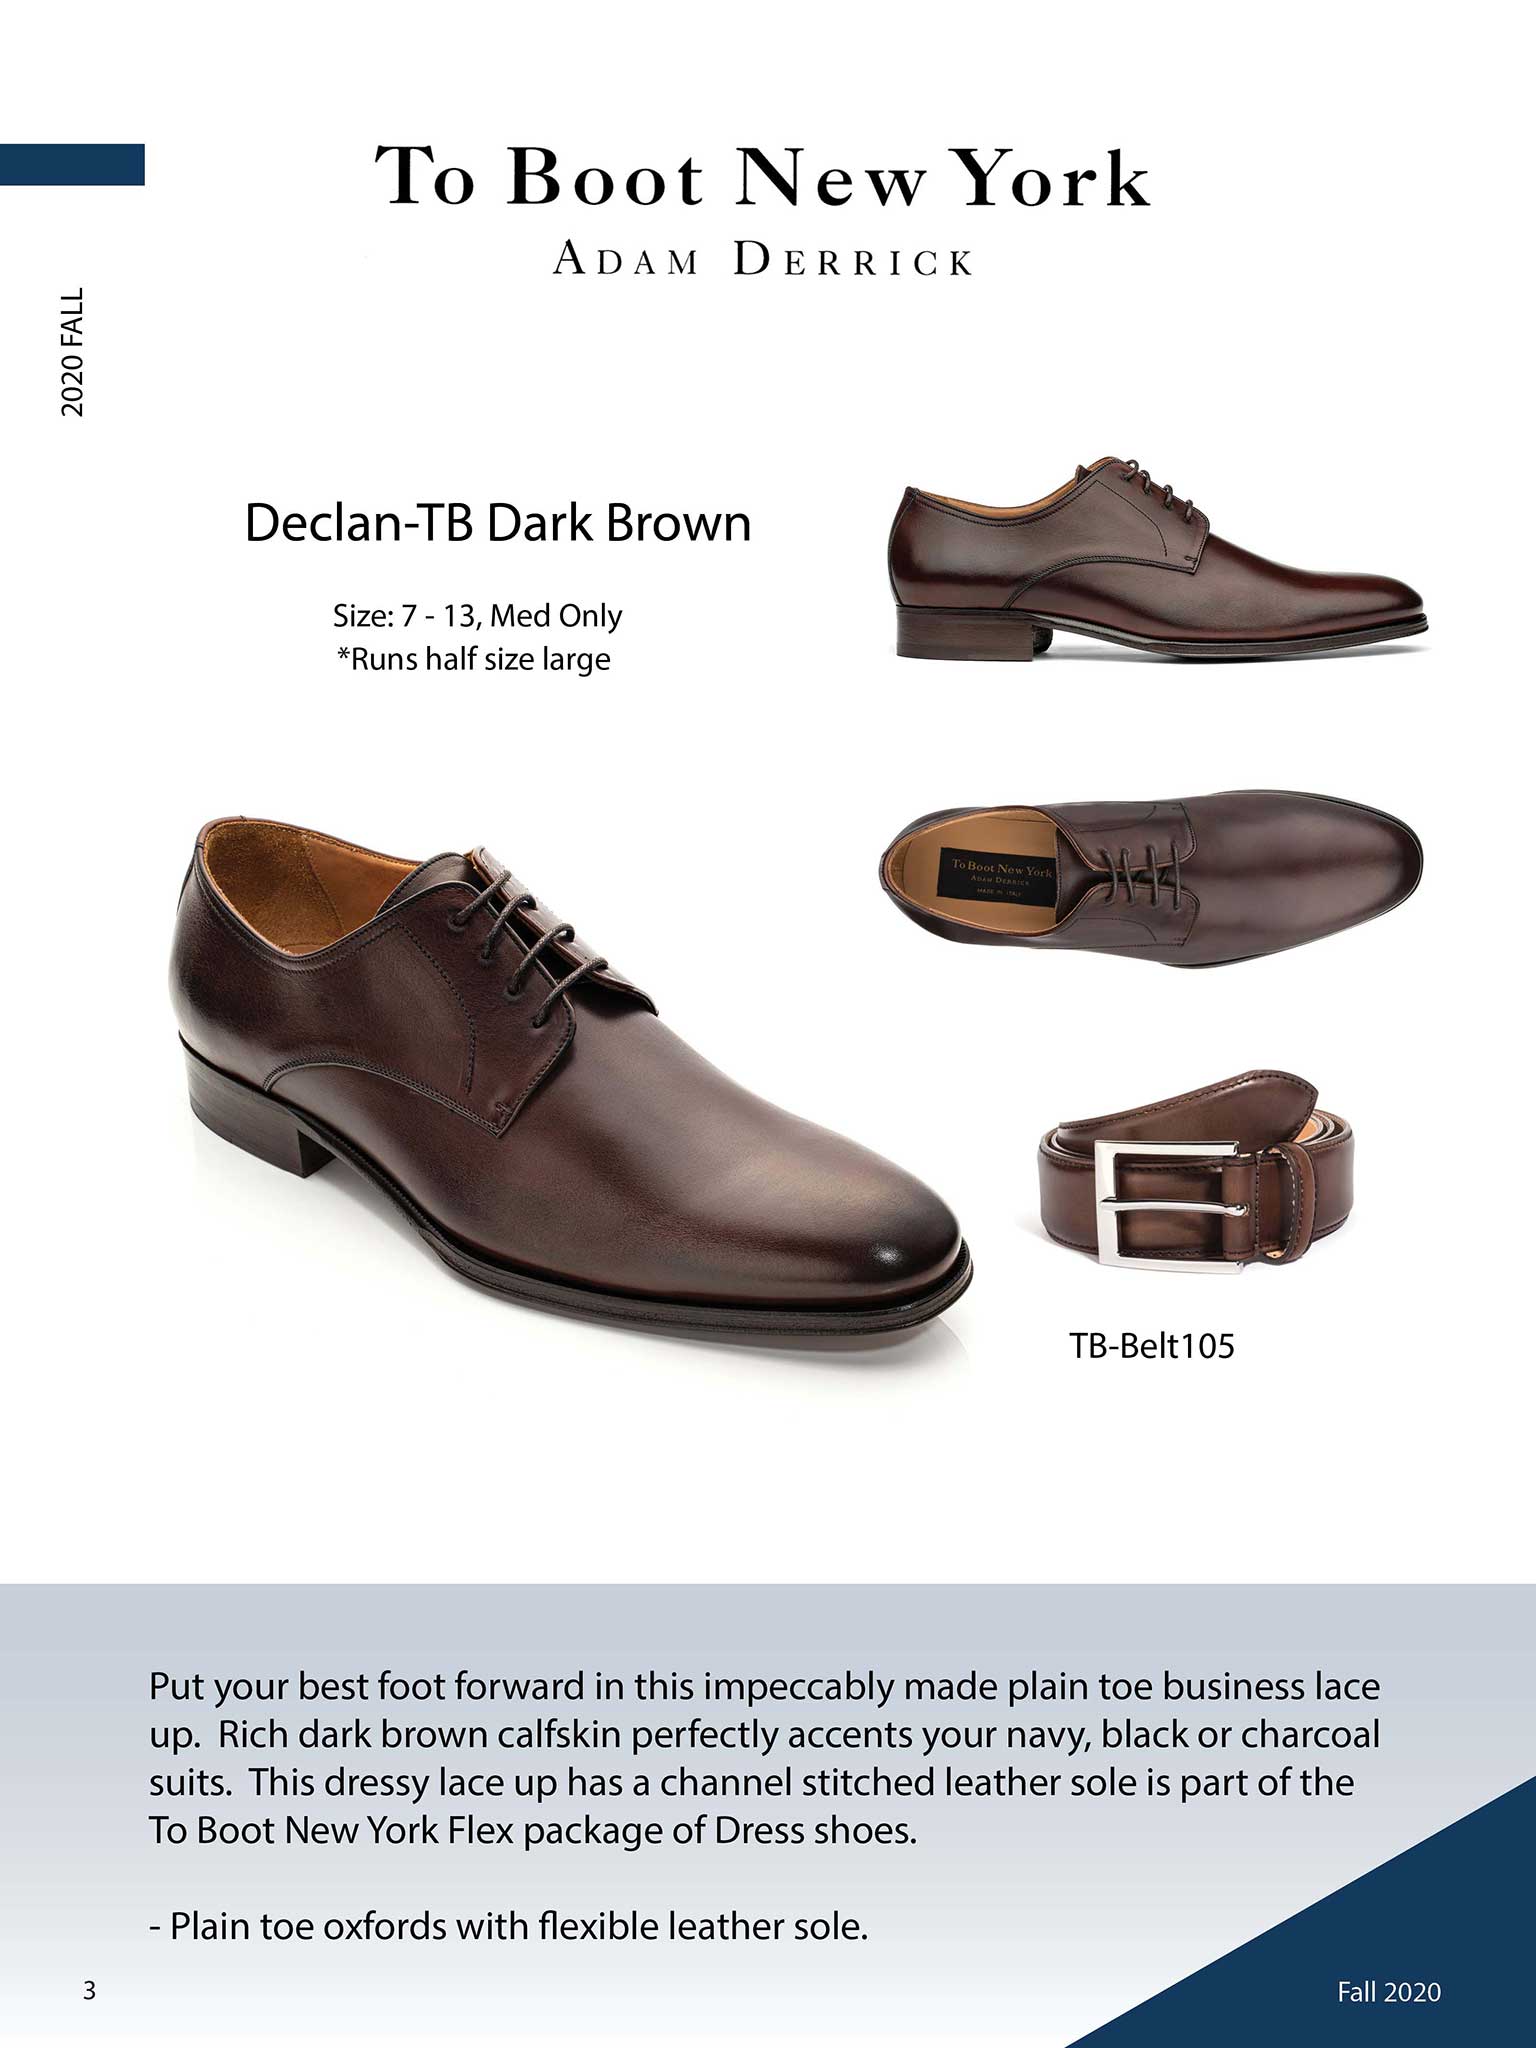 Declan in Dark Brown by To Boot New York